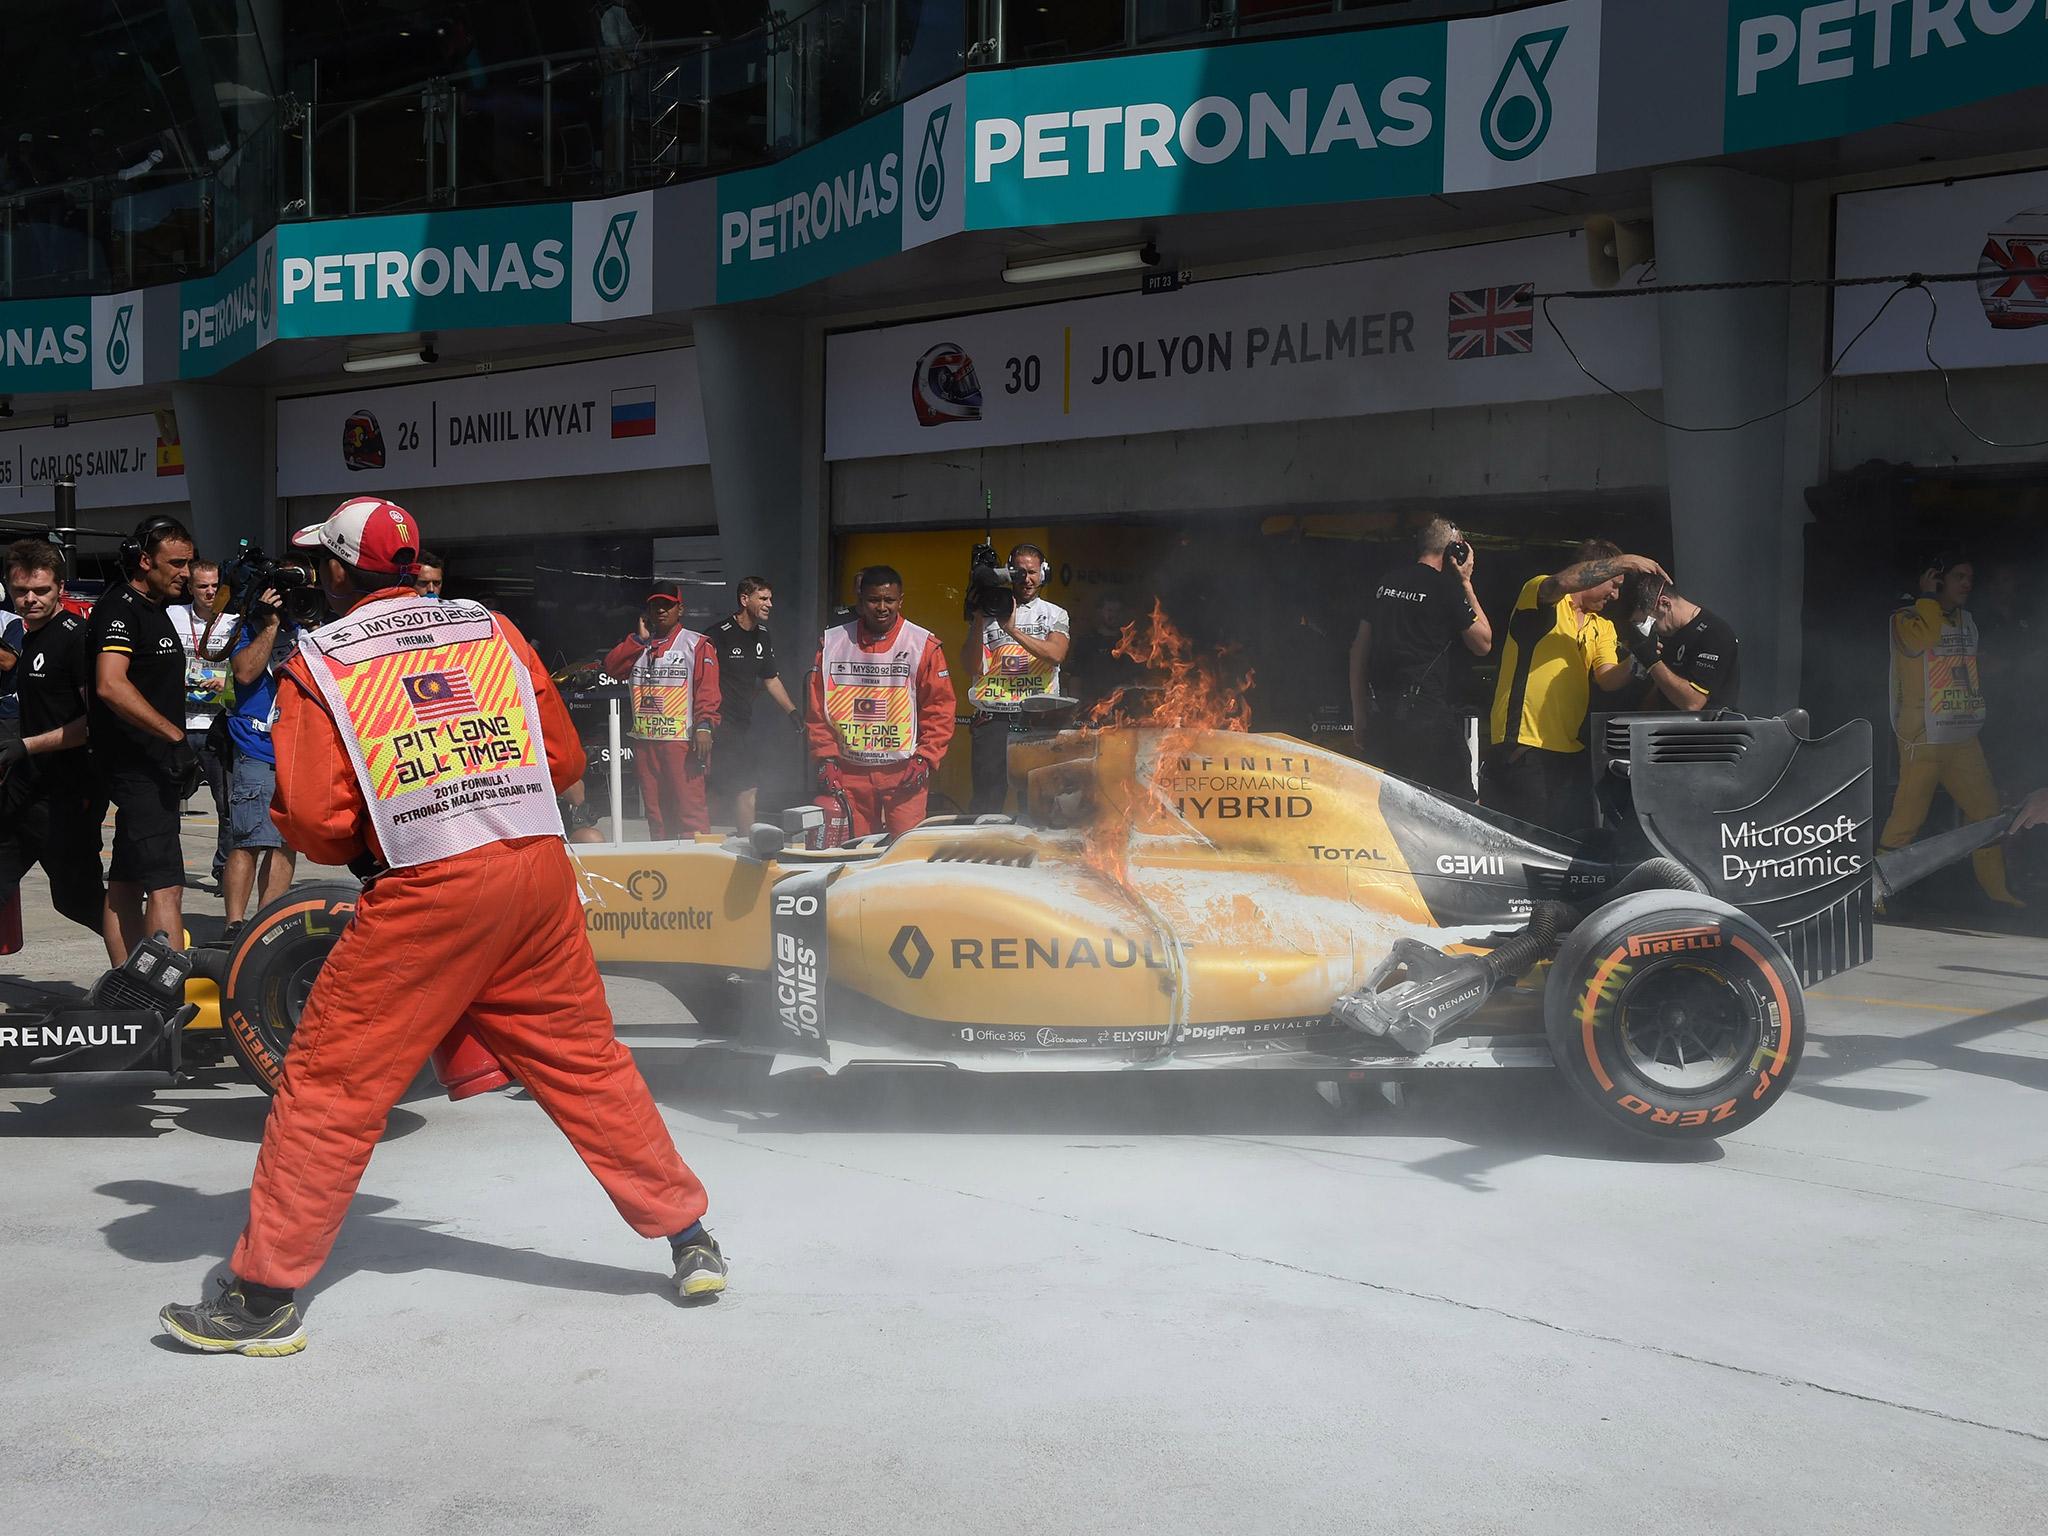 &#13;
Renault mechanics repeatedly tried to put the fire out &#13;